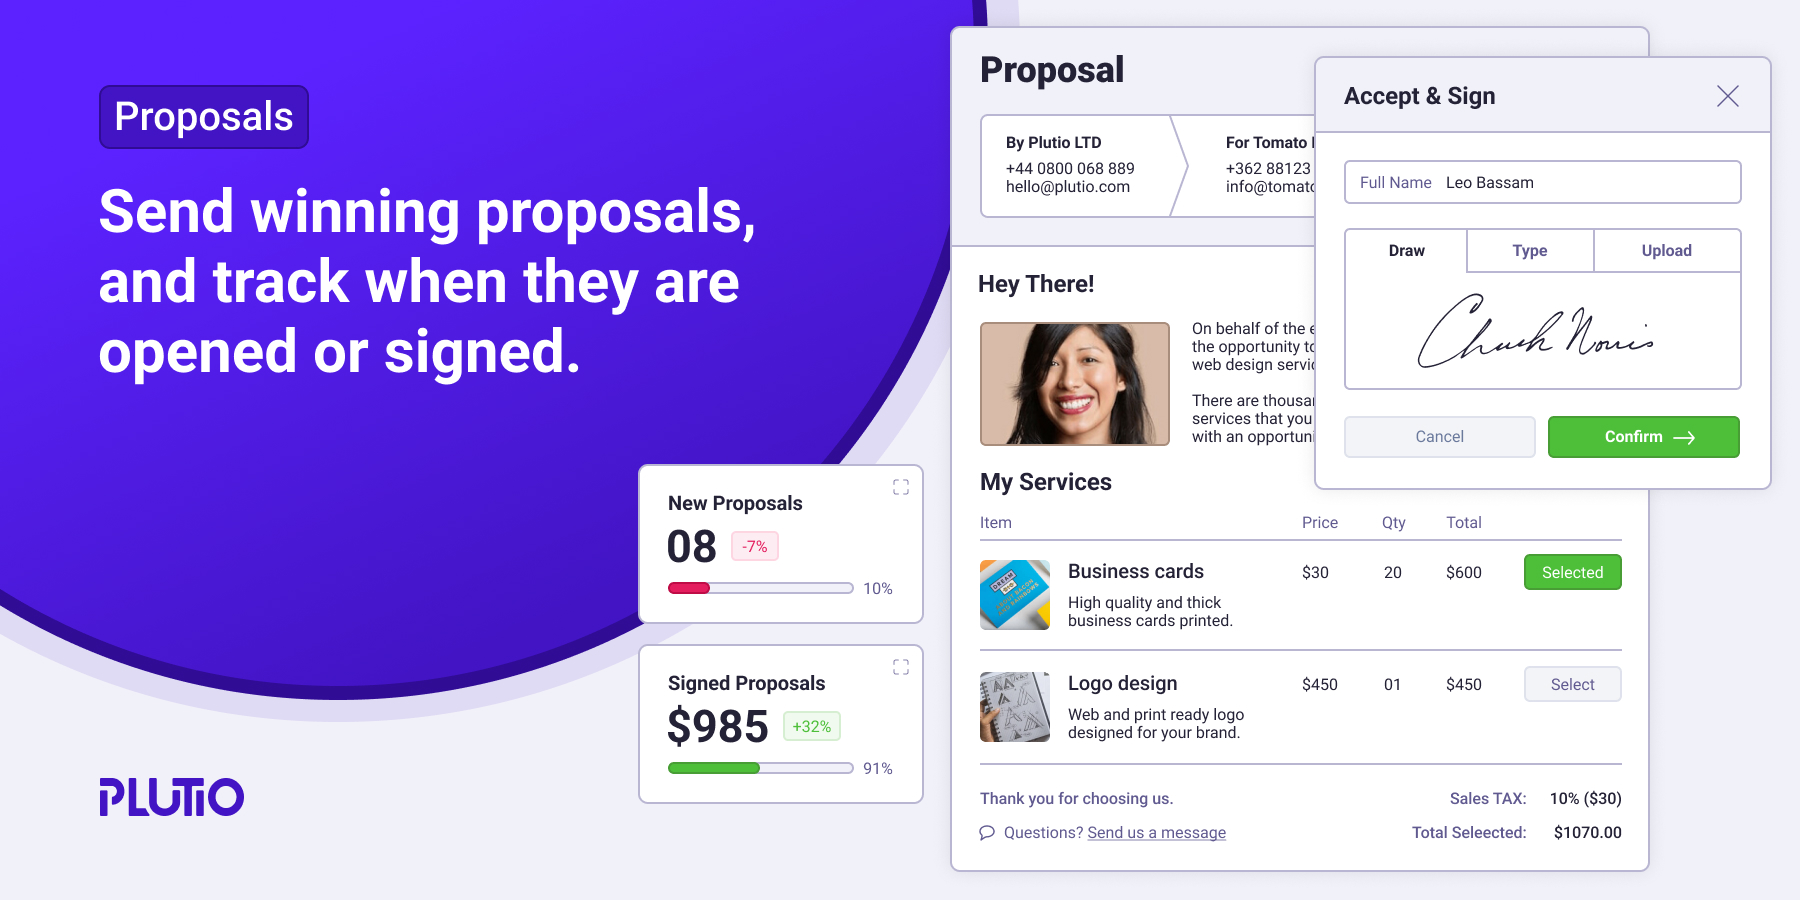 Plutio brand asset - proposals and contracts